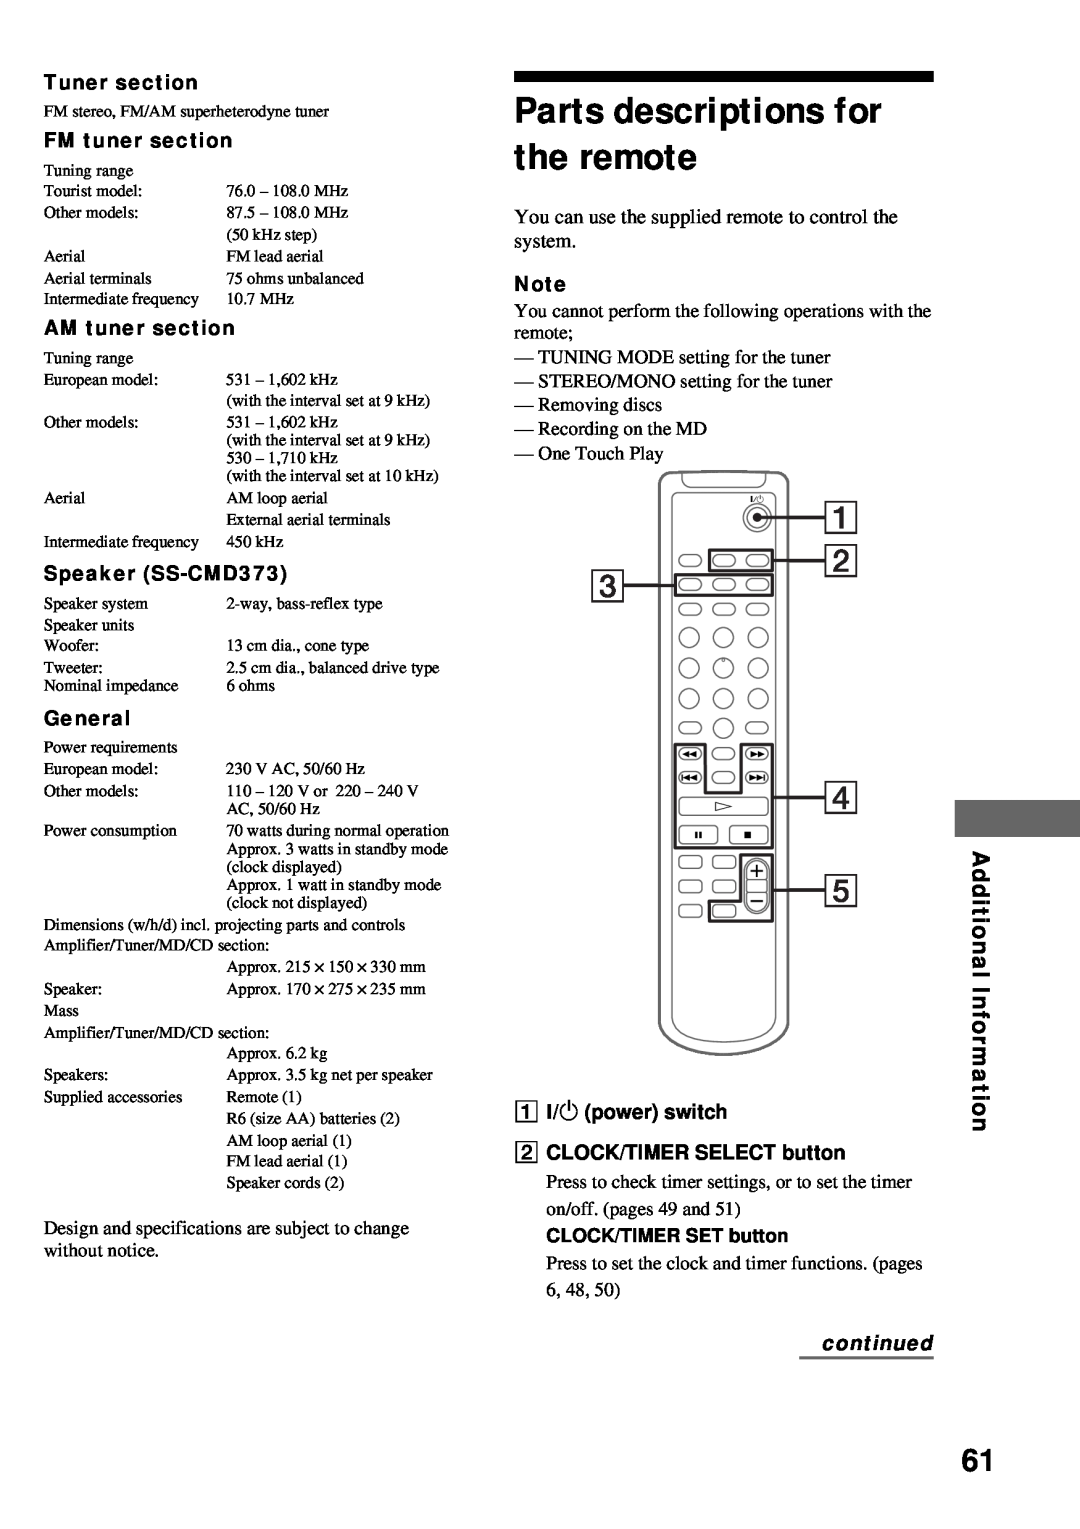 Sony DHC-MD373 Parts descriptions for the remote, Information, Tuner section, FM tuner section, AM tuner section, General 